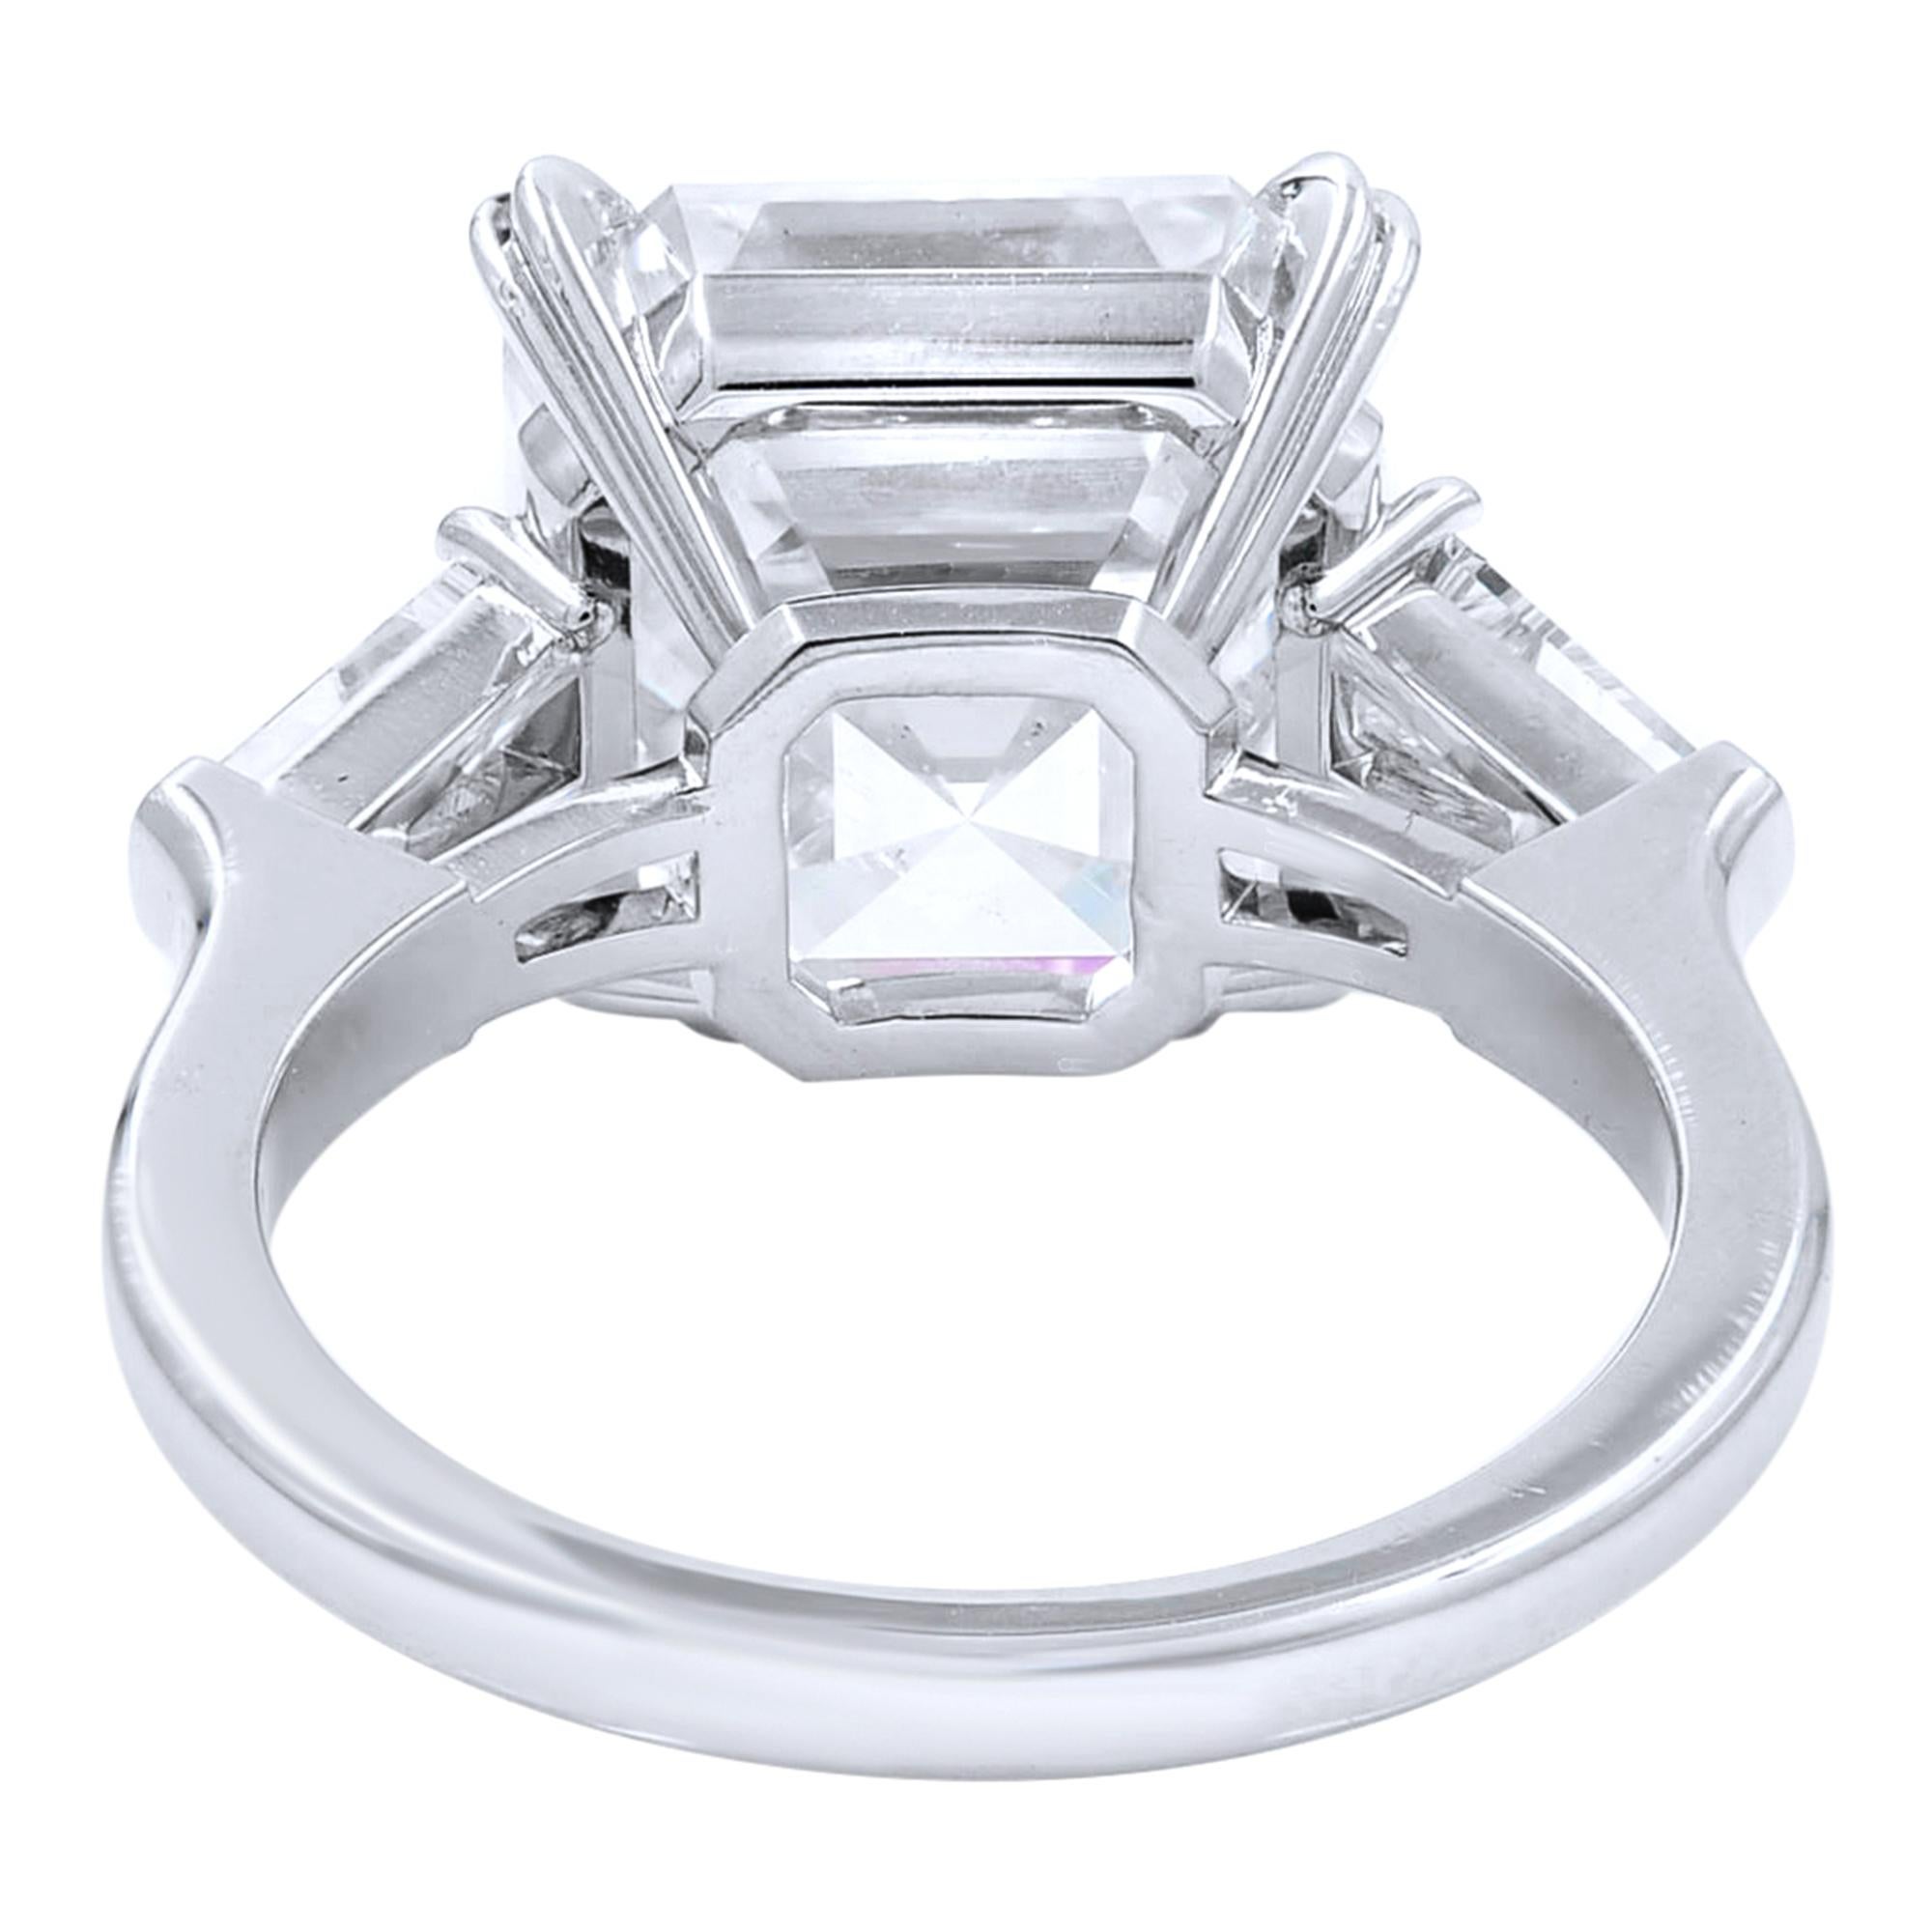 10.00 ct Asscher Cut Three Stone Custom Made Engagement Ring Platinum GIA
This is handmade one of a kind diamond engagement ring crafted in luxurious Platinum. Mounted with stunning and super clean I color VS2 clarity diamond. GIA certified.